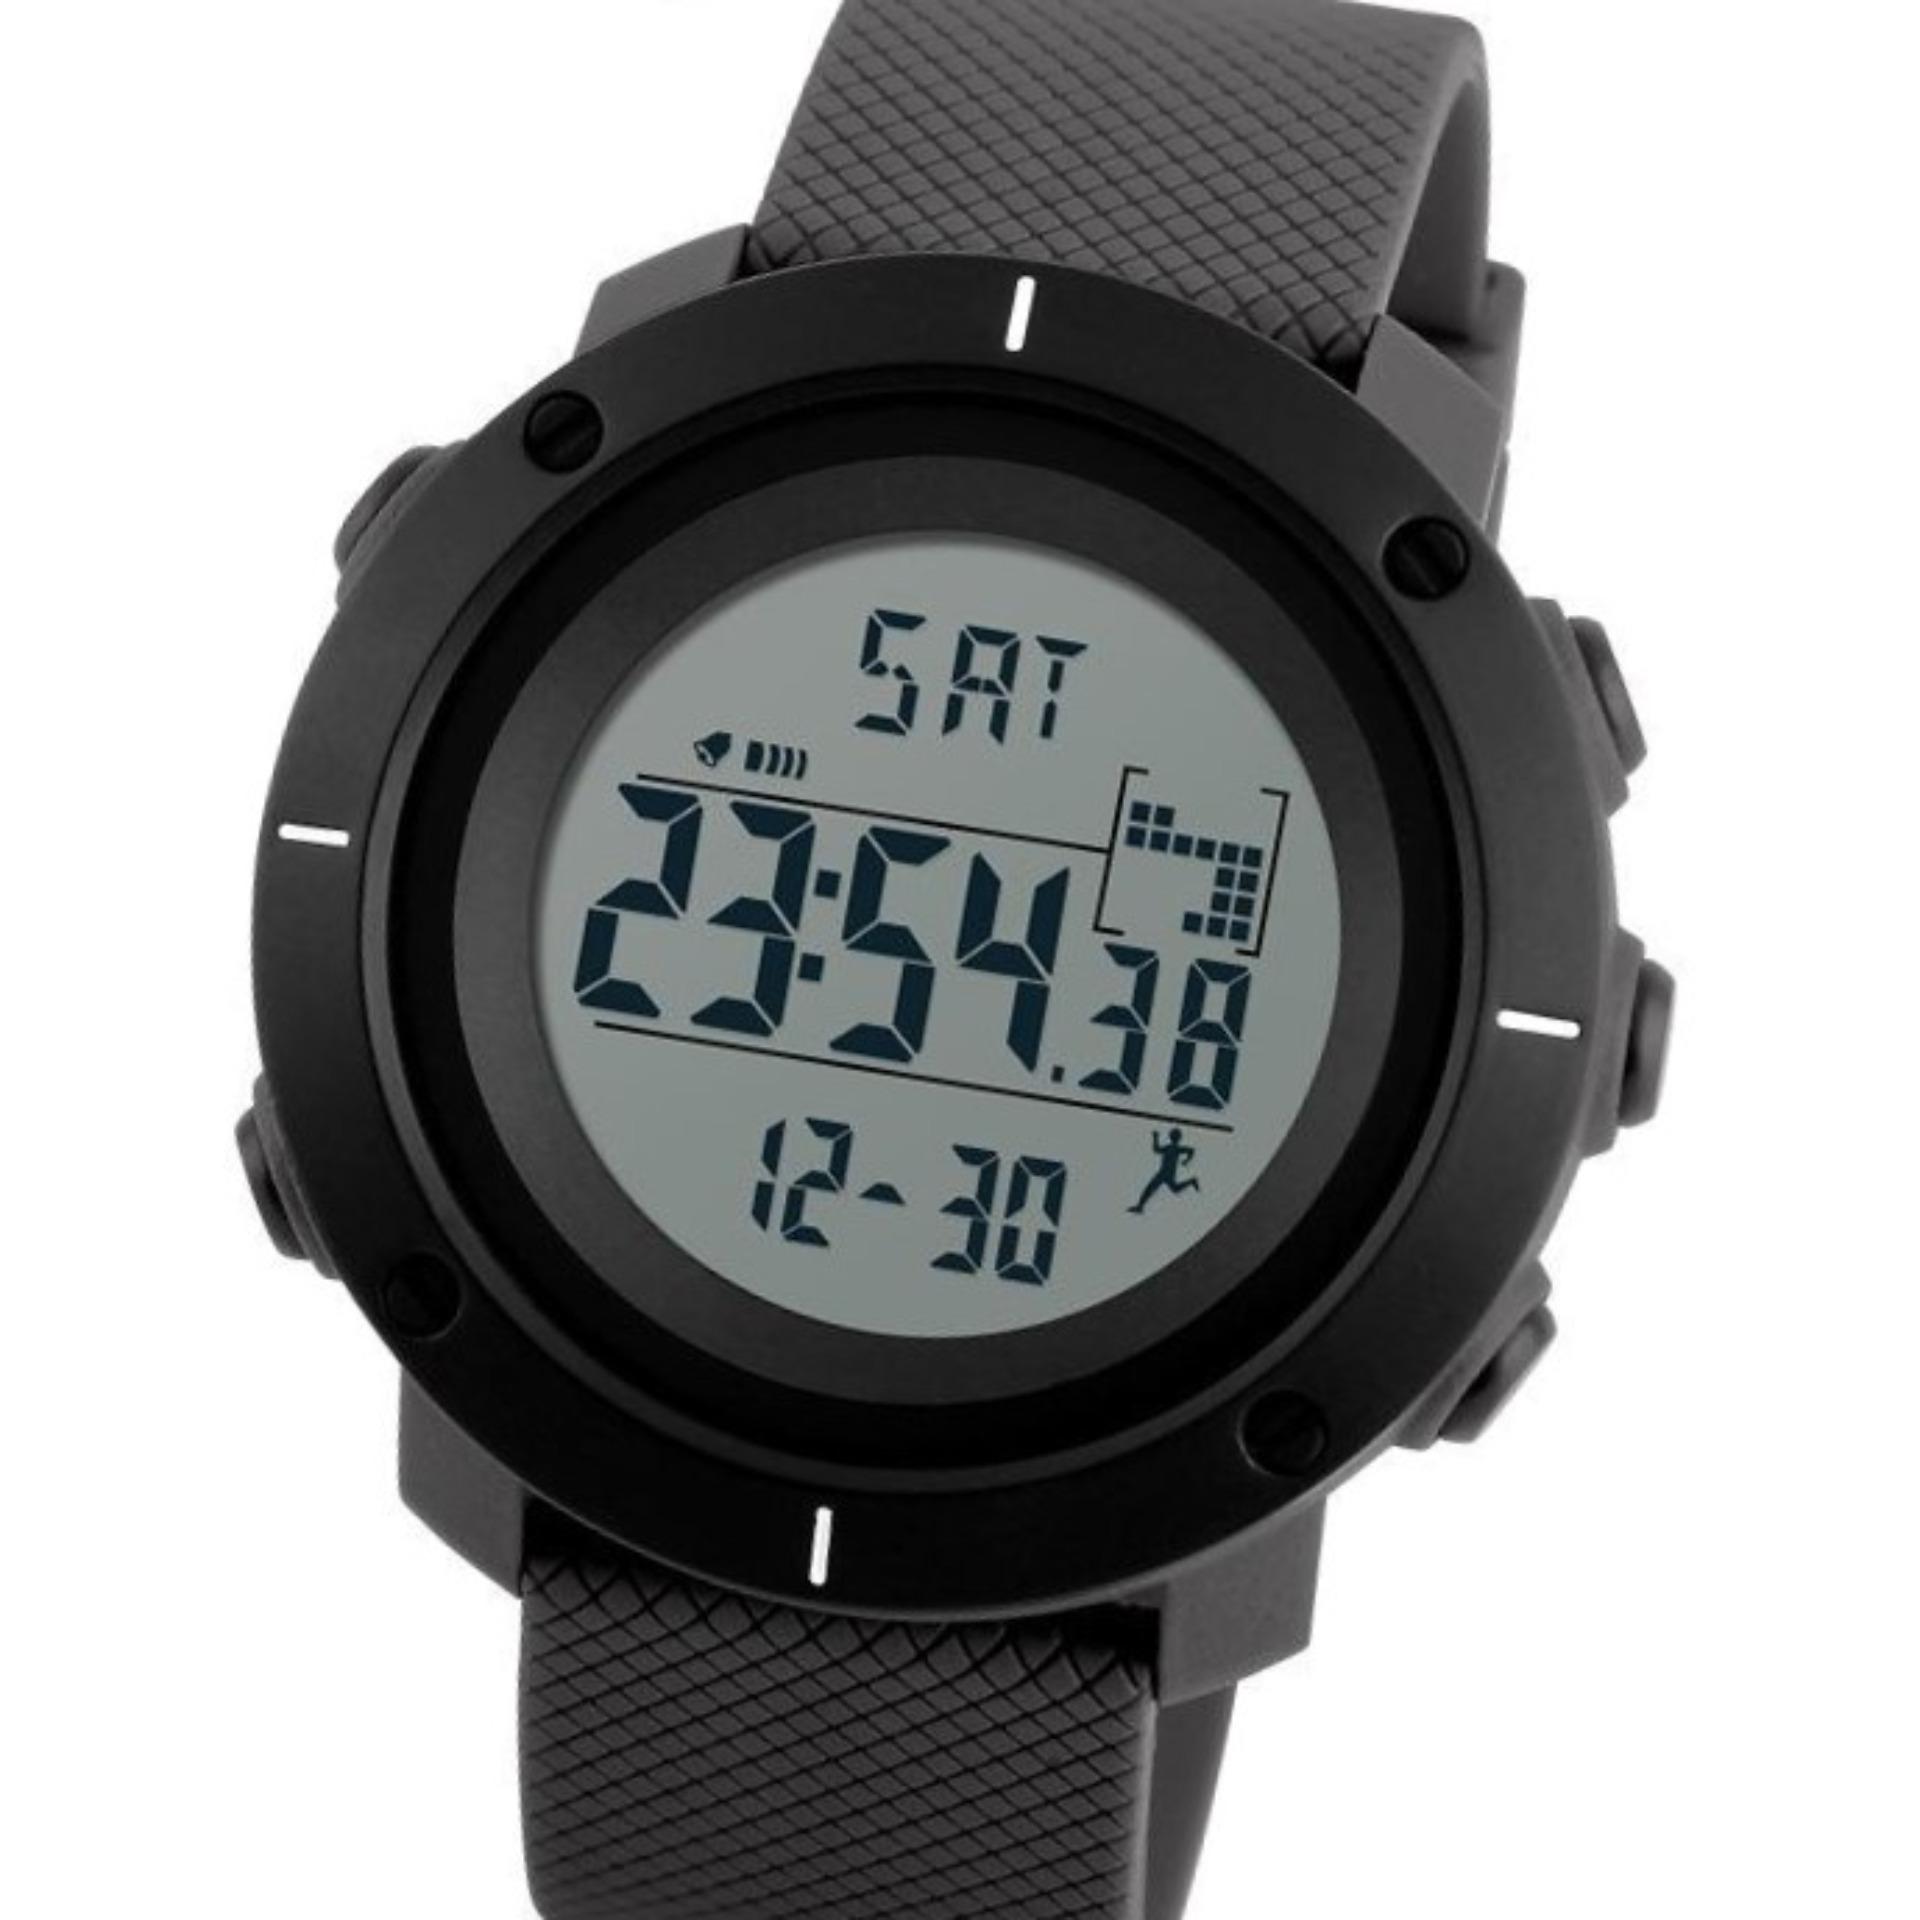 SMAEL Olive Sport Digital Watch for Men Waterproof Auto Date Week  Electronic Watches LED Display часы мужские relogio masculino